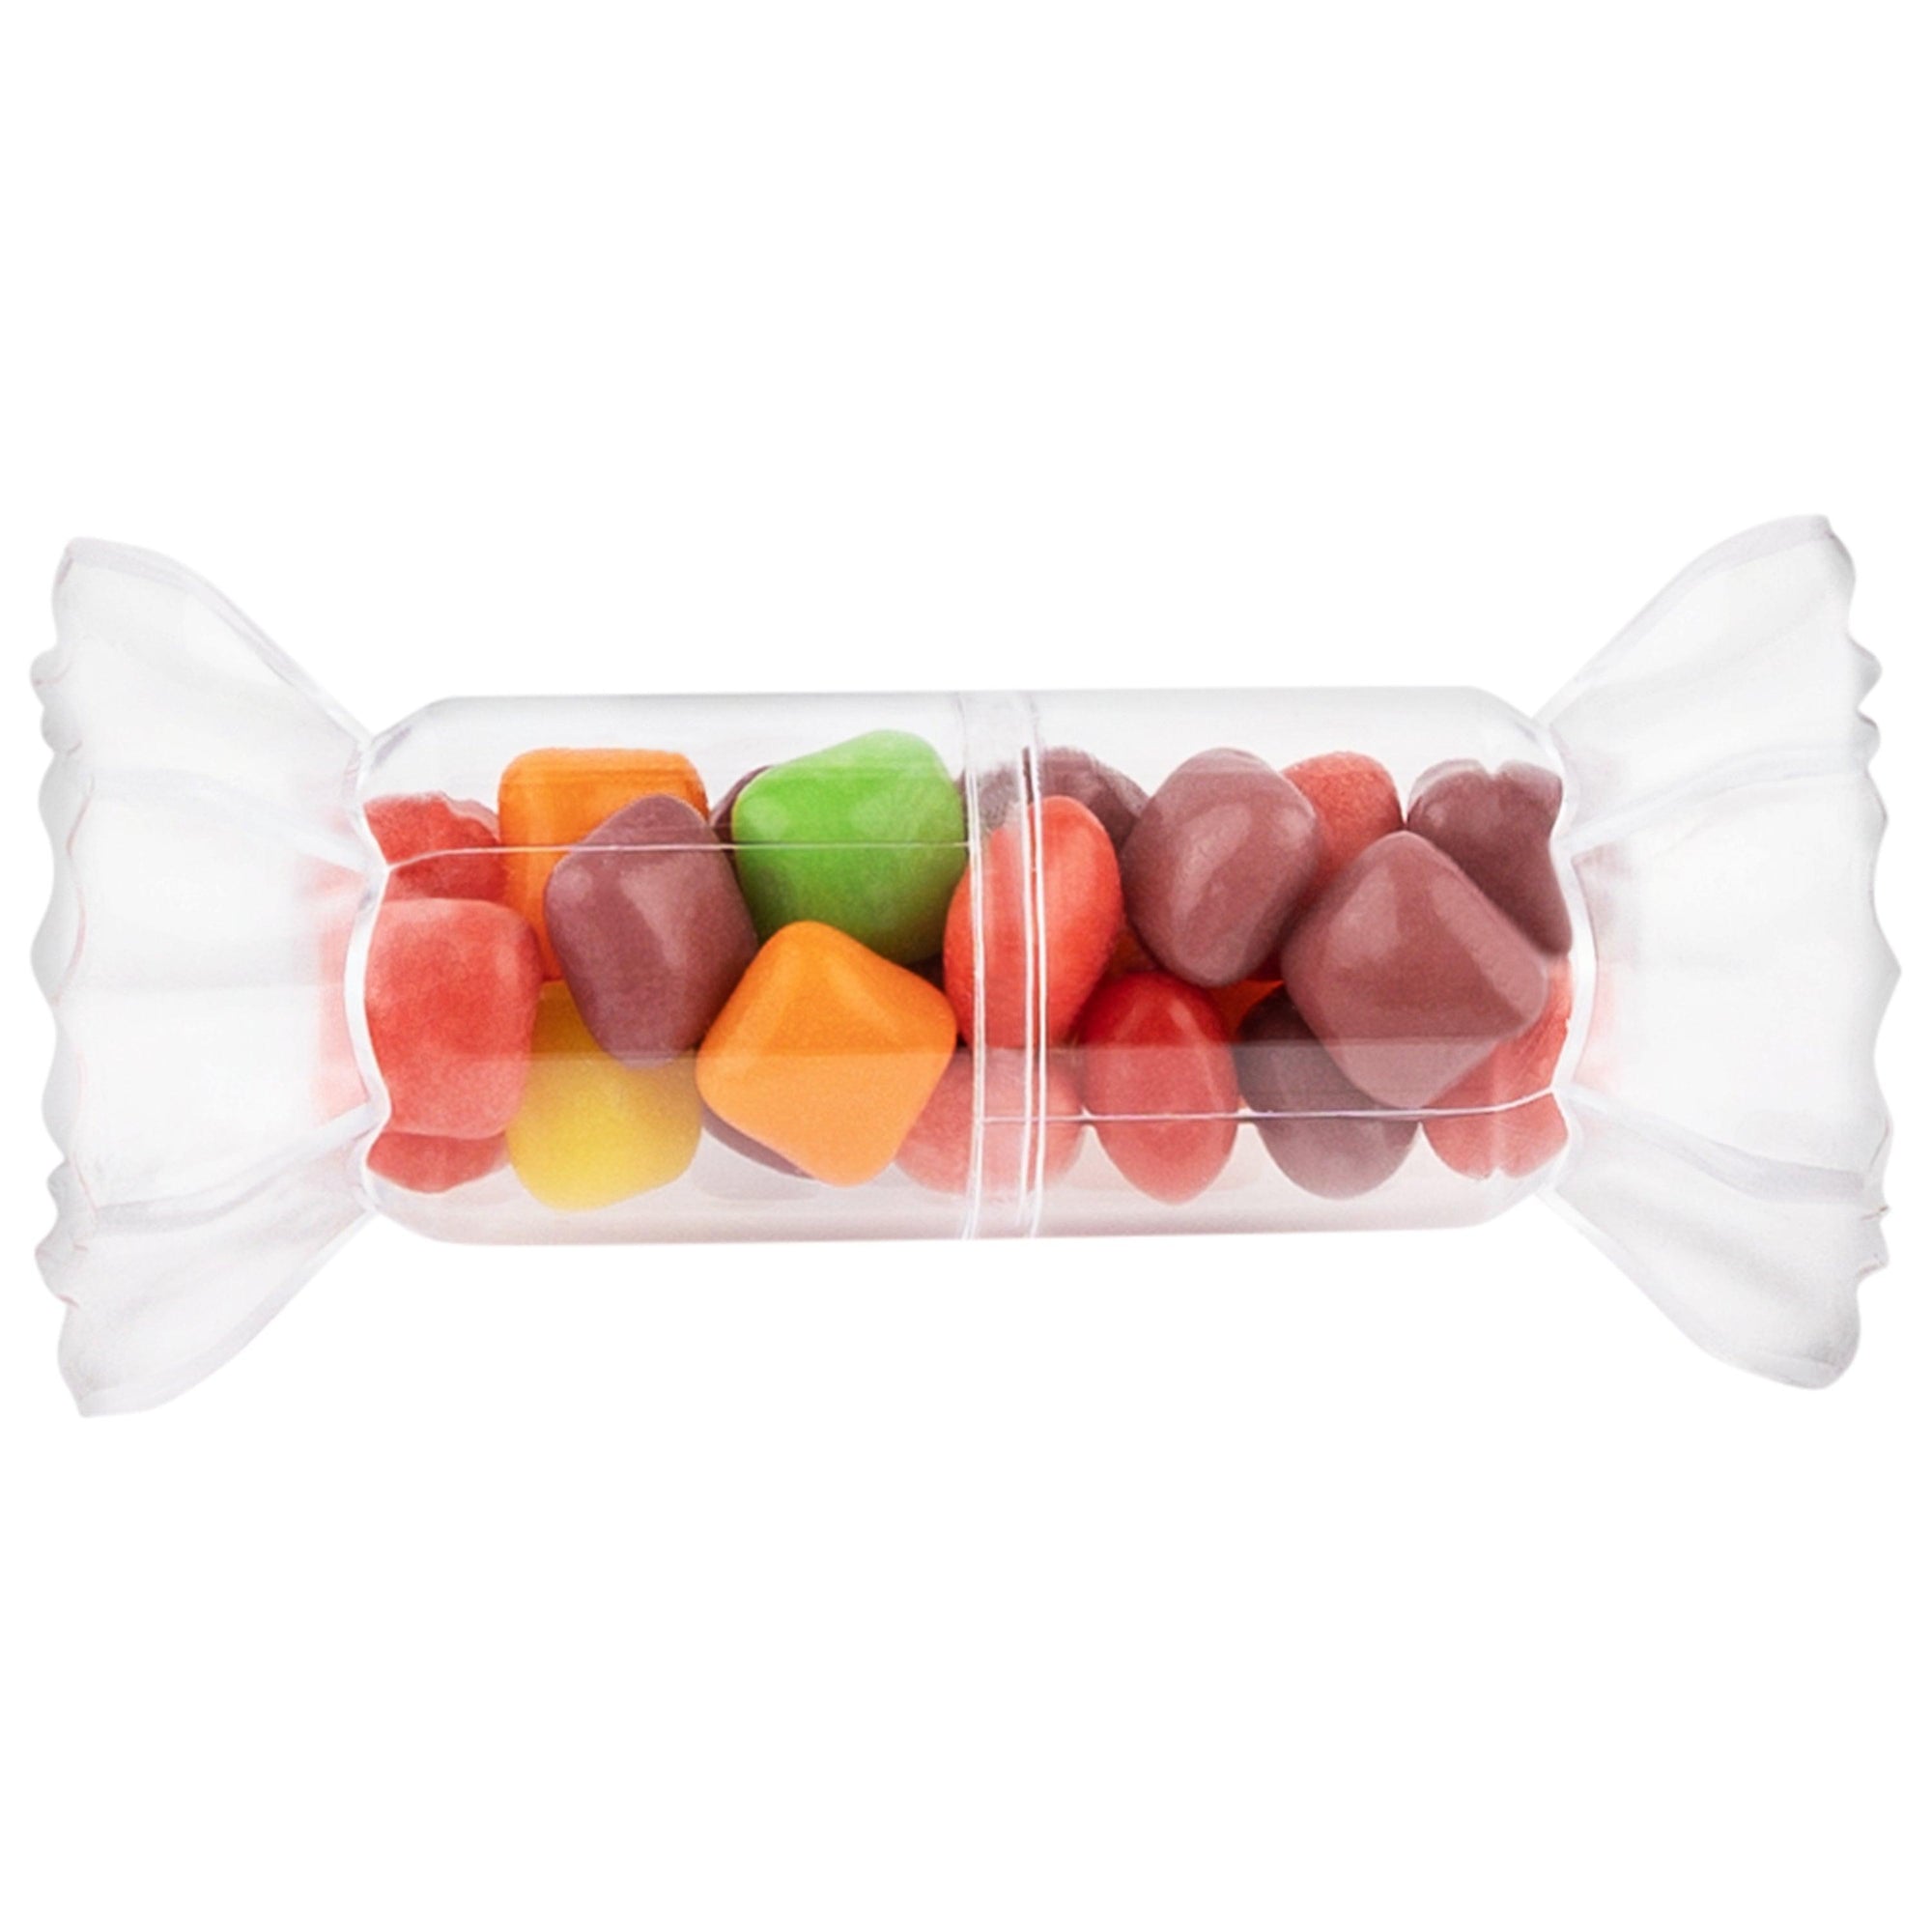 Candy Shaped Acrylic Candy Boxes 24 Pack 3.54"X1.77"X1.77" | Amazing Pinatas 